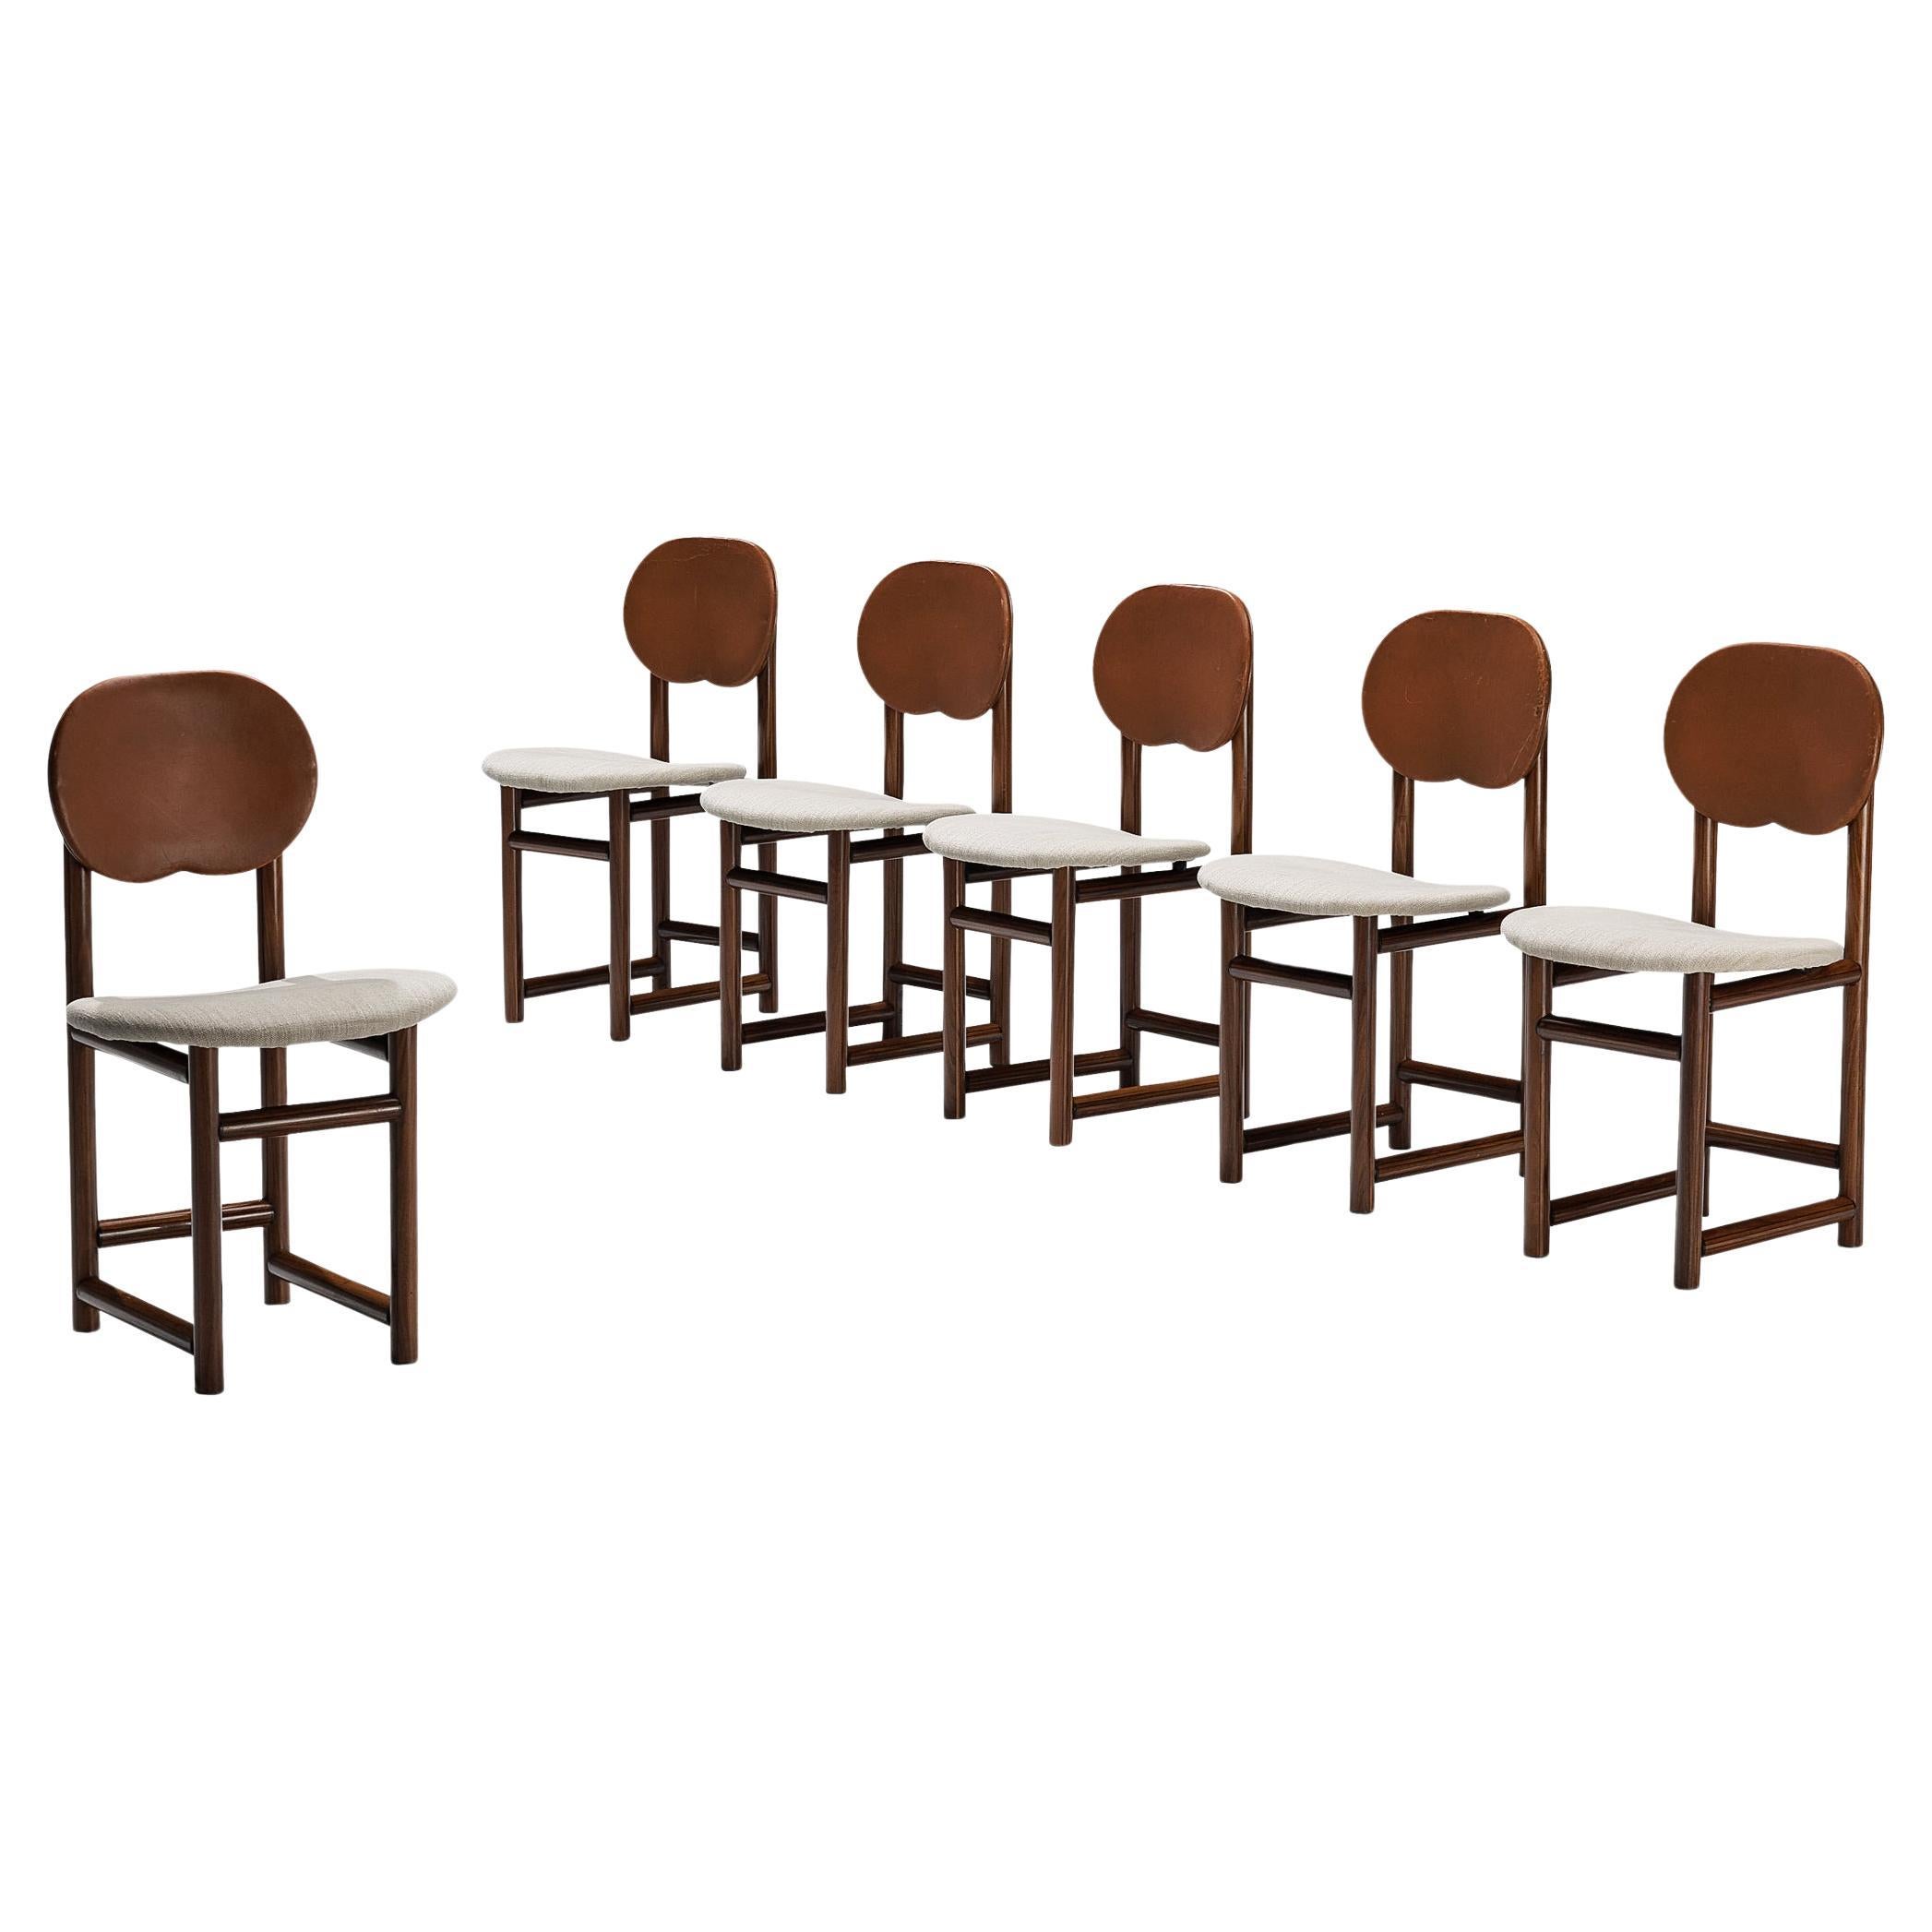 Afra & Tobia Scarpa for Maxalto 'New Harmony' Set of Six Dining Chairs  For Sale